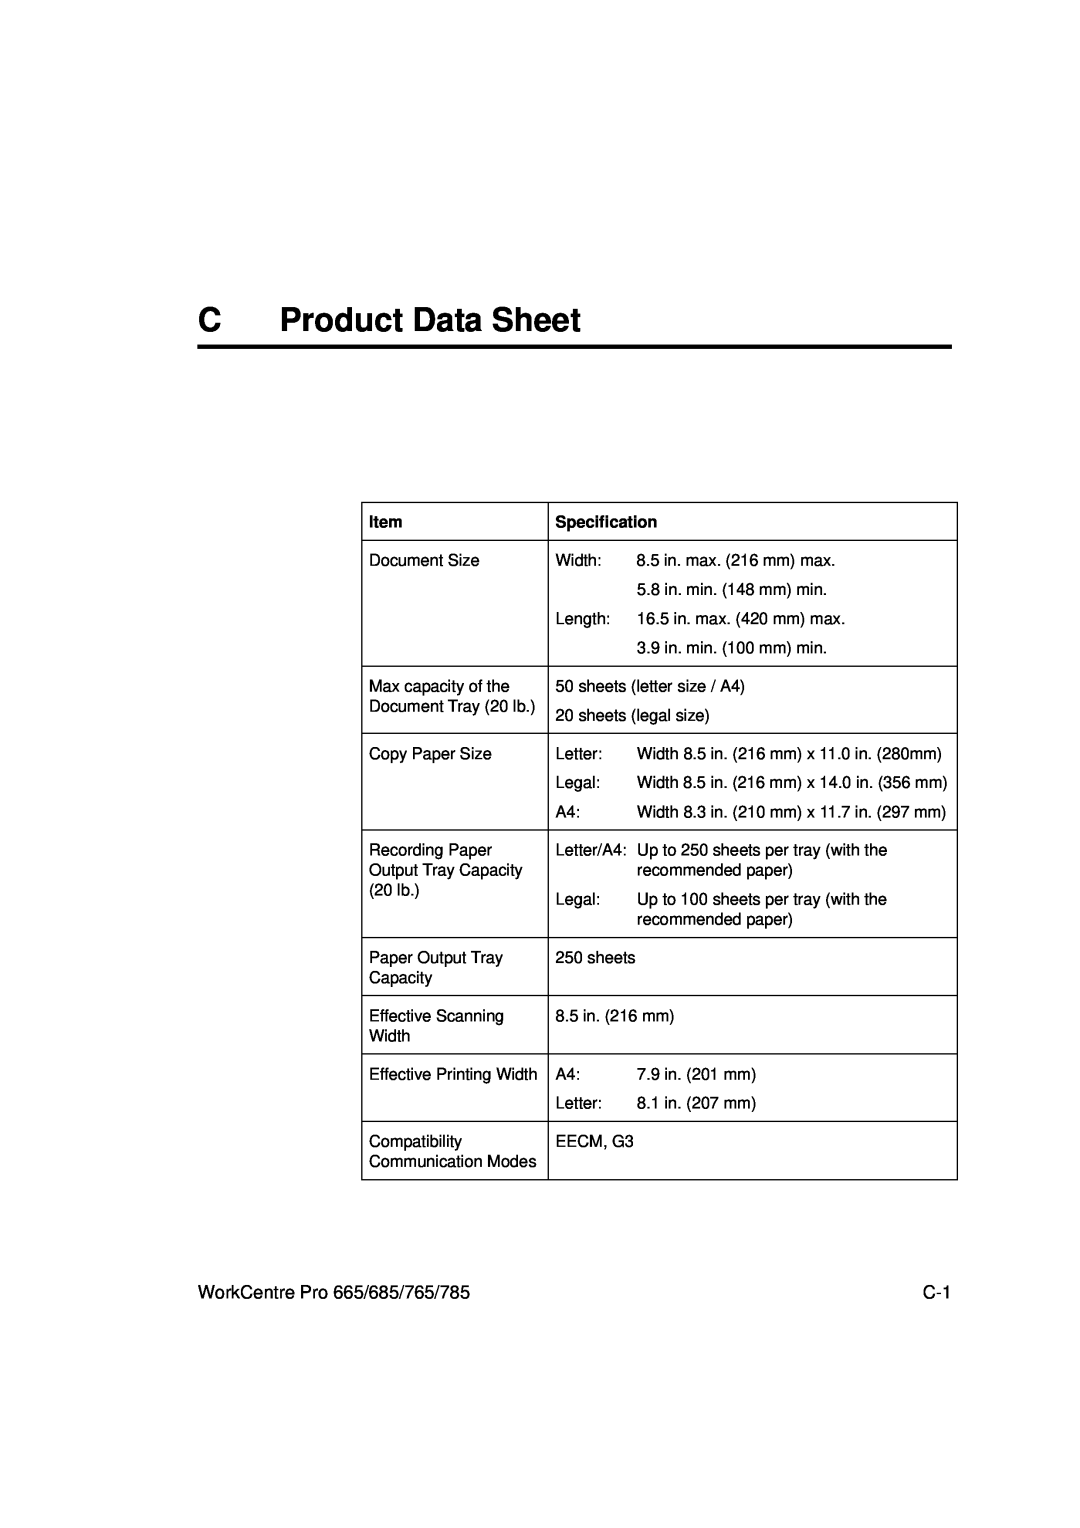 Xerox manual C Product Data Sheet, WorkCentre Pro 665/685/765/785, Item, Specification 